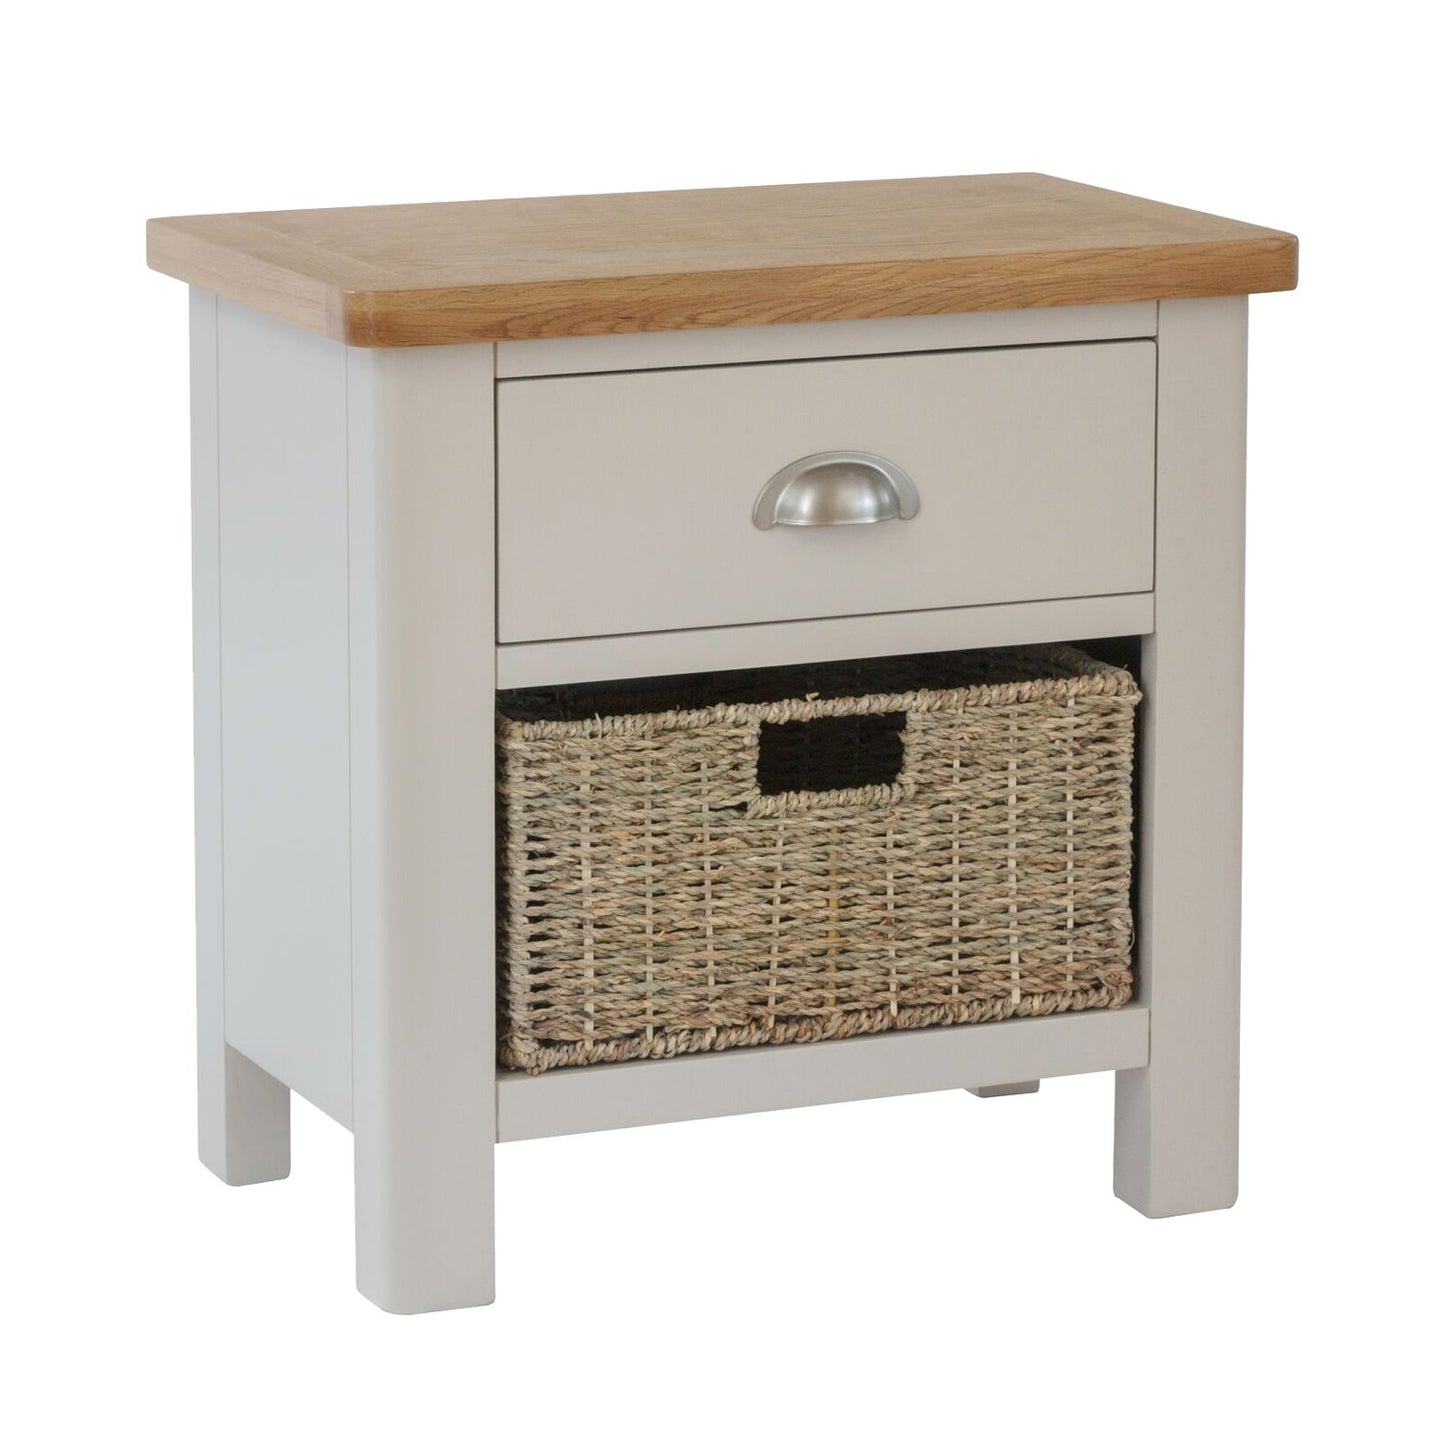 Small Side Table 1 Drawer & Basket